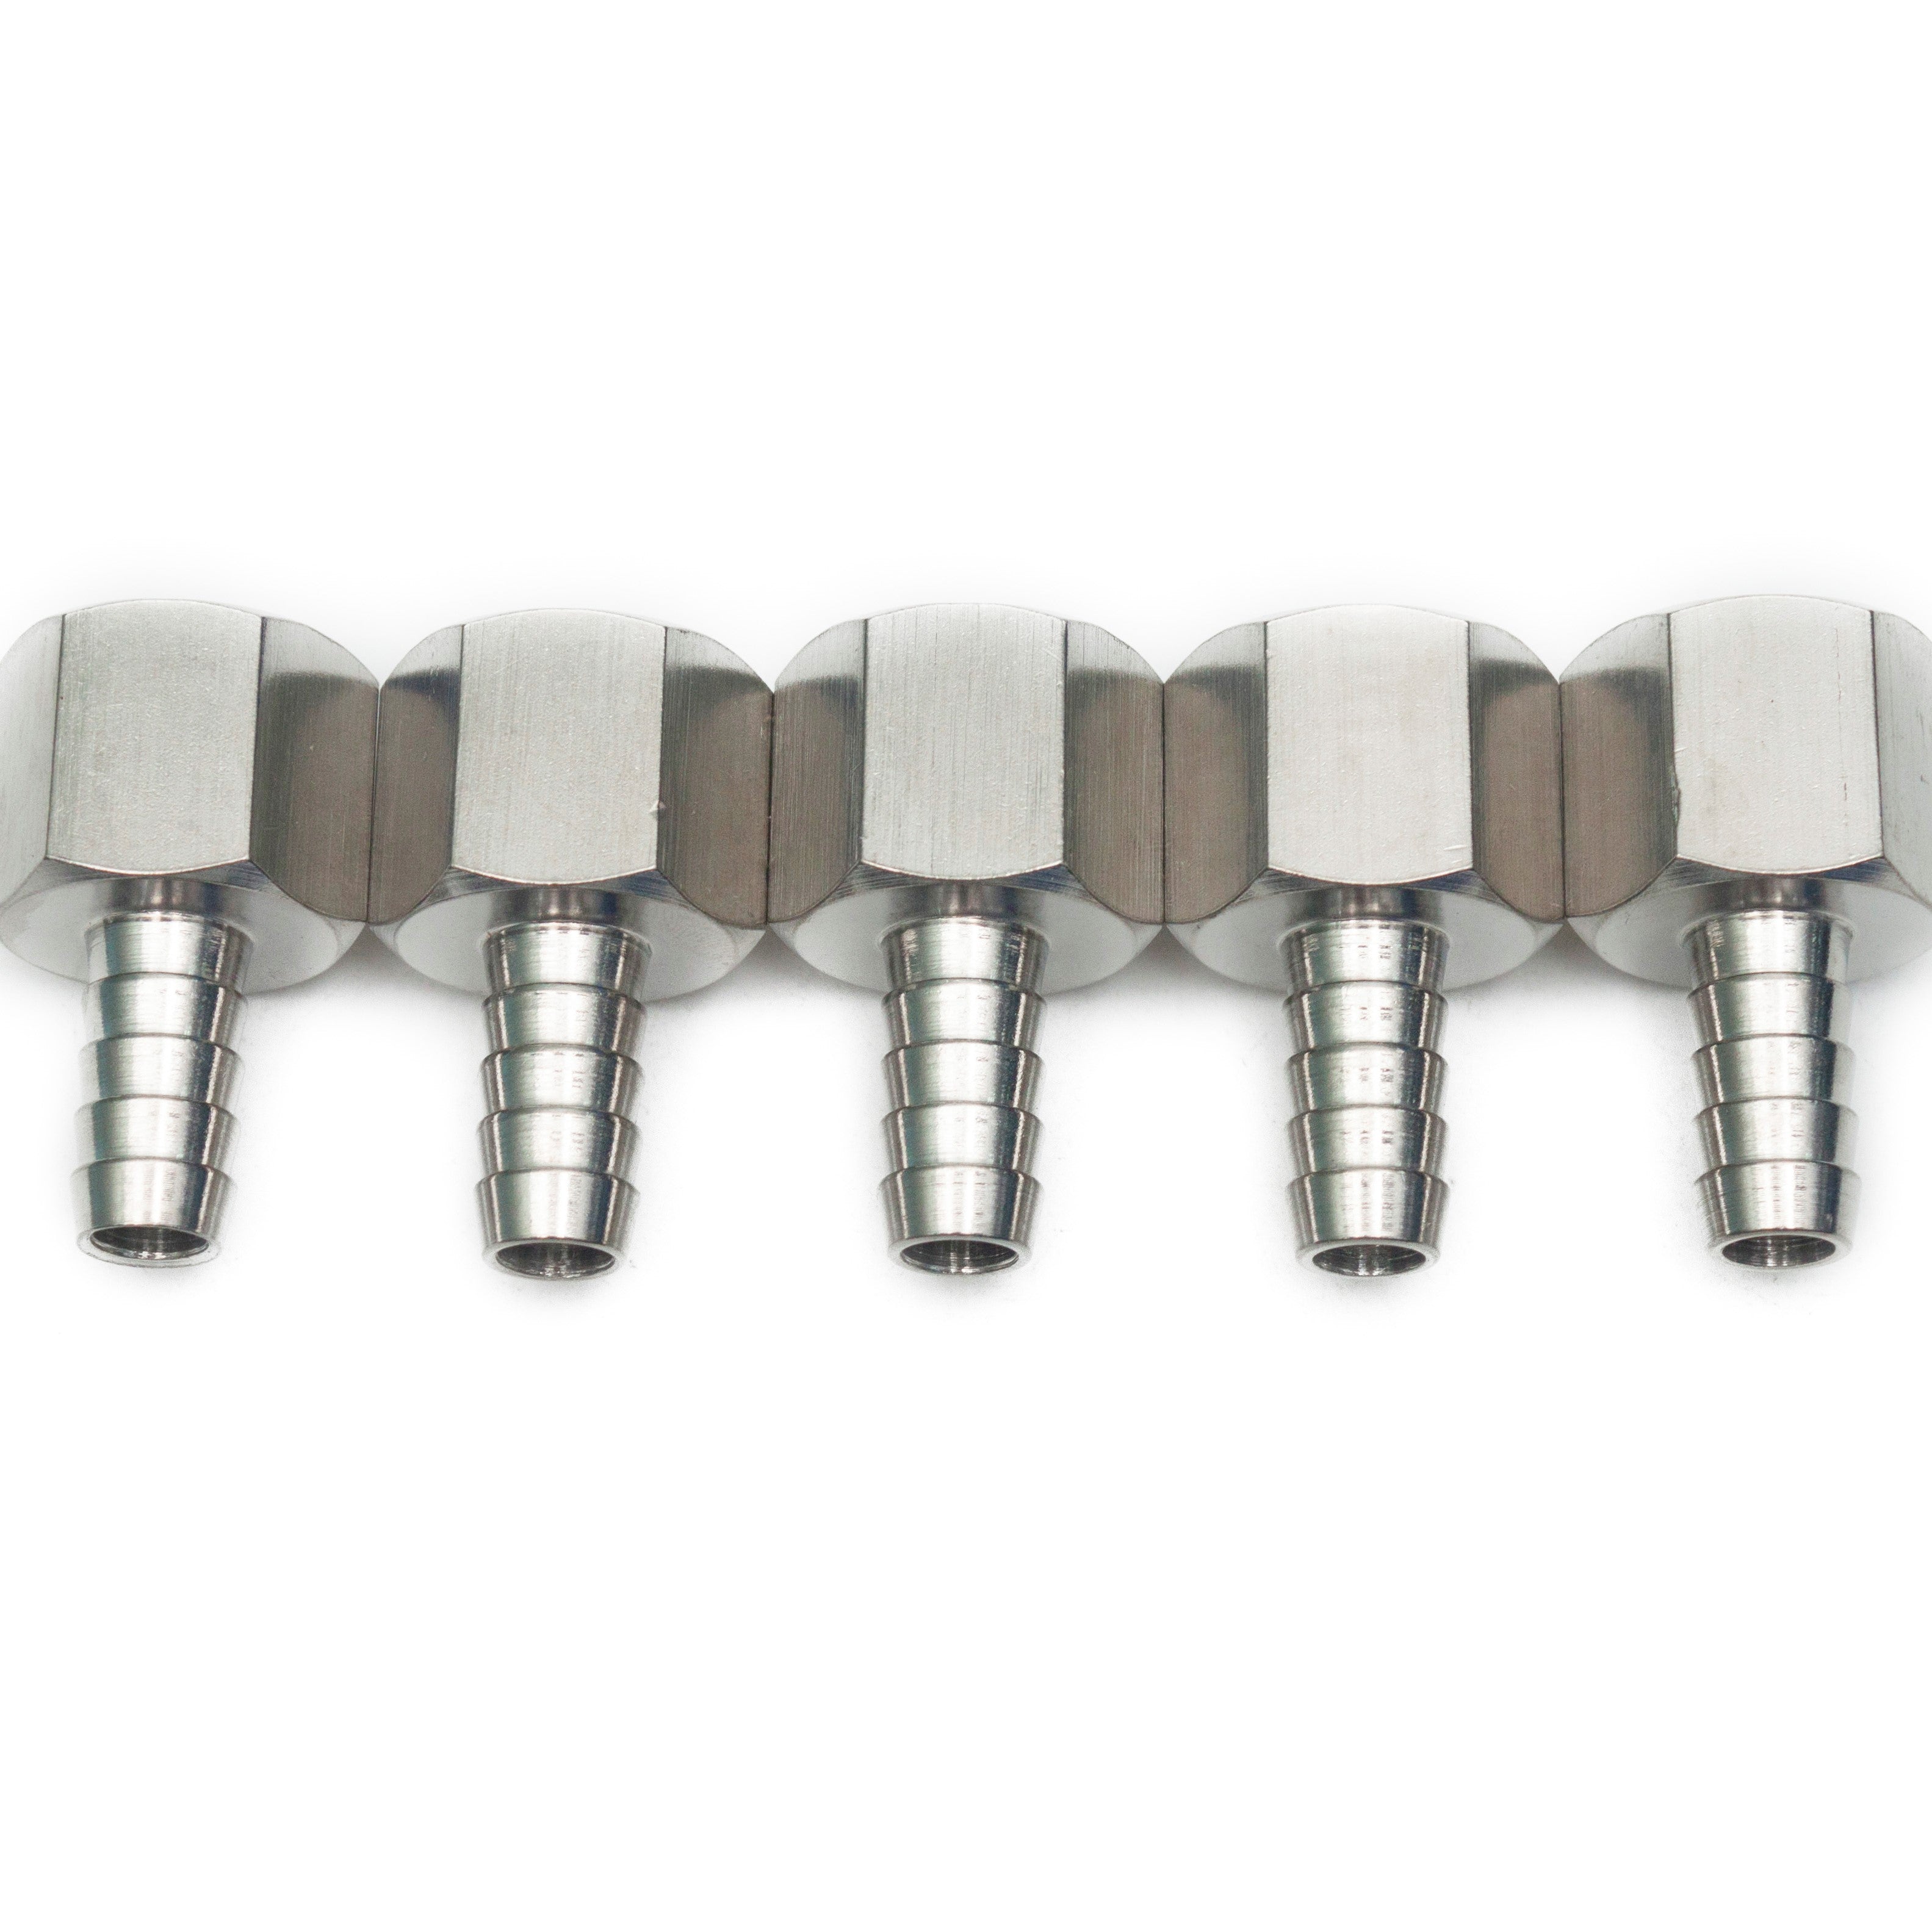 LTWFITTING Bar Production Stainless Steel 316 Barb Fitting Coupler 3/8 Inch Hose ID x 1/2 Inch Female NPT Air Fuel Water (Pack of 5)